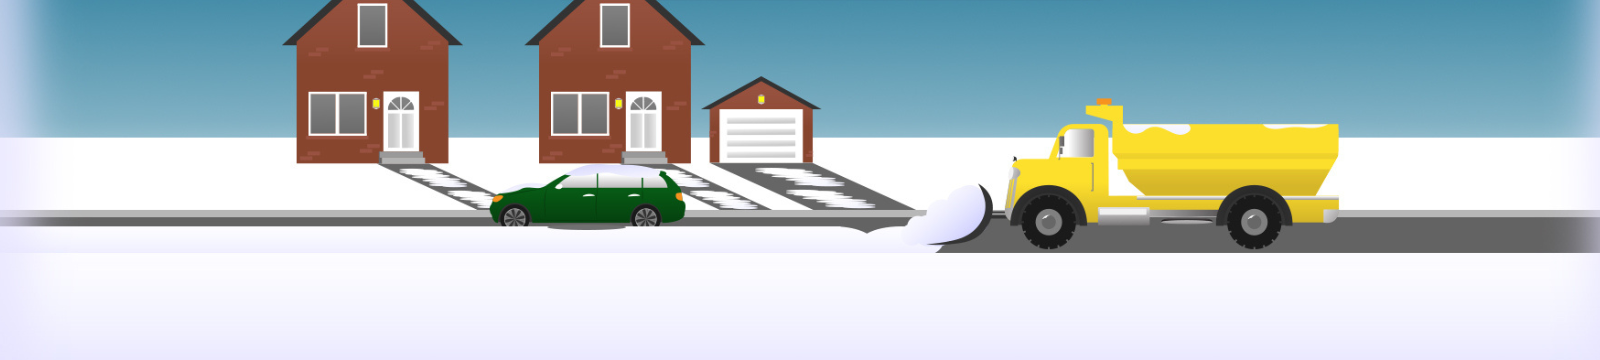 Snow plow unable with car in its way